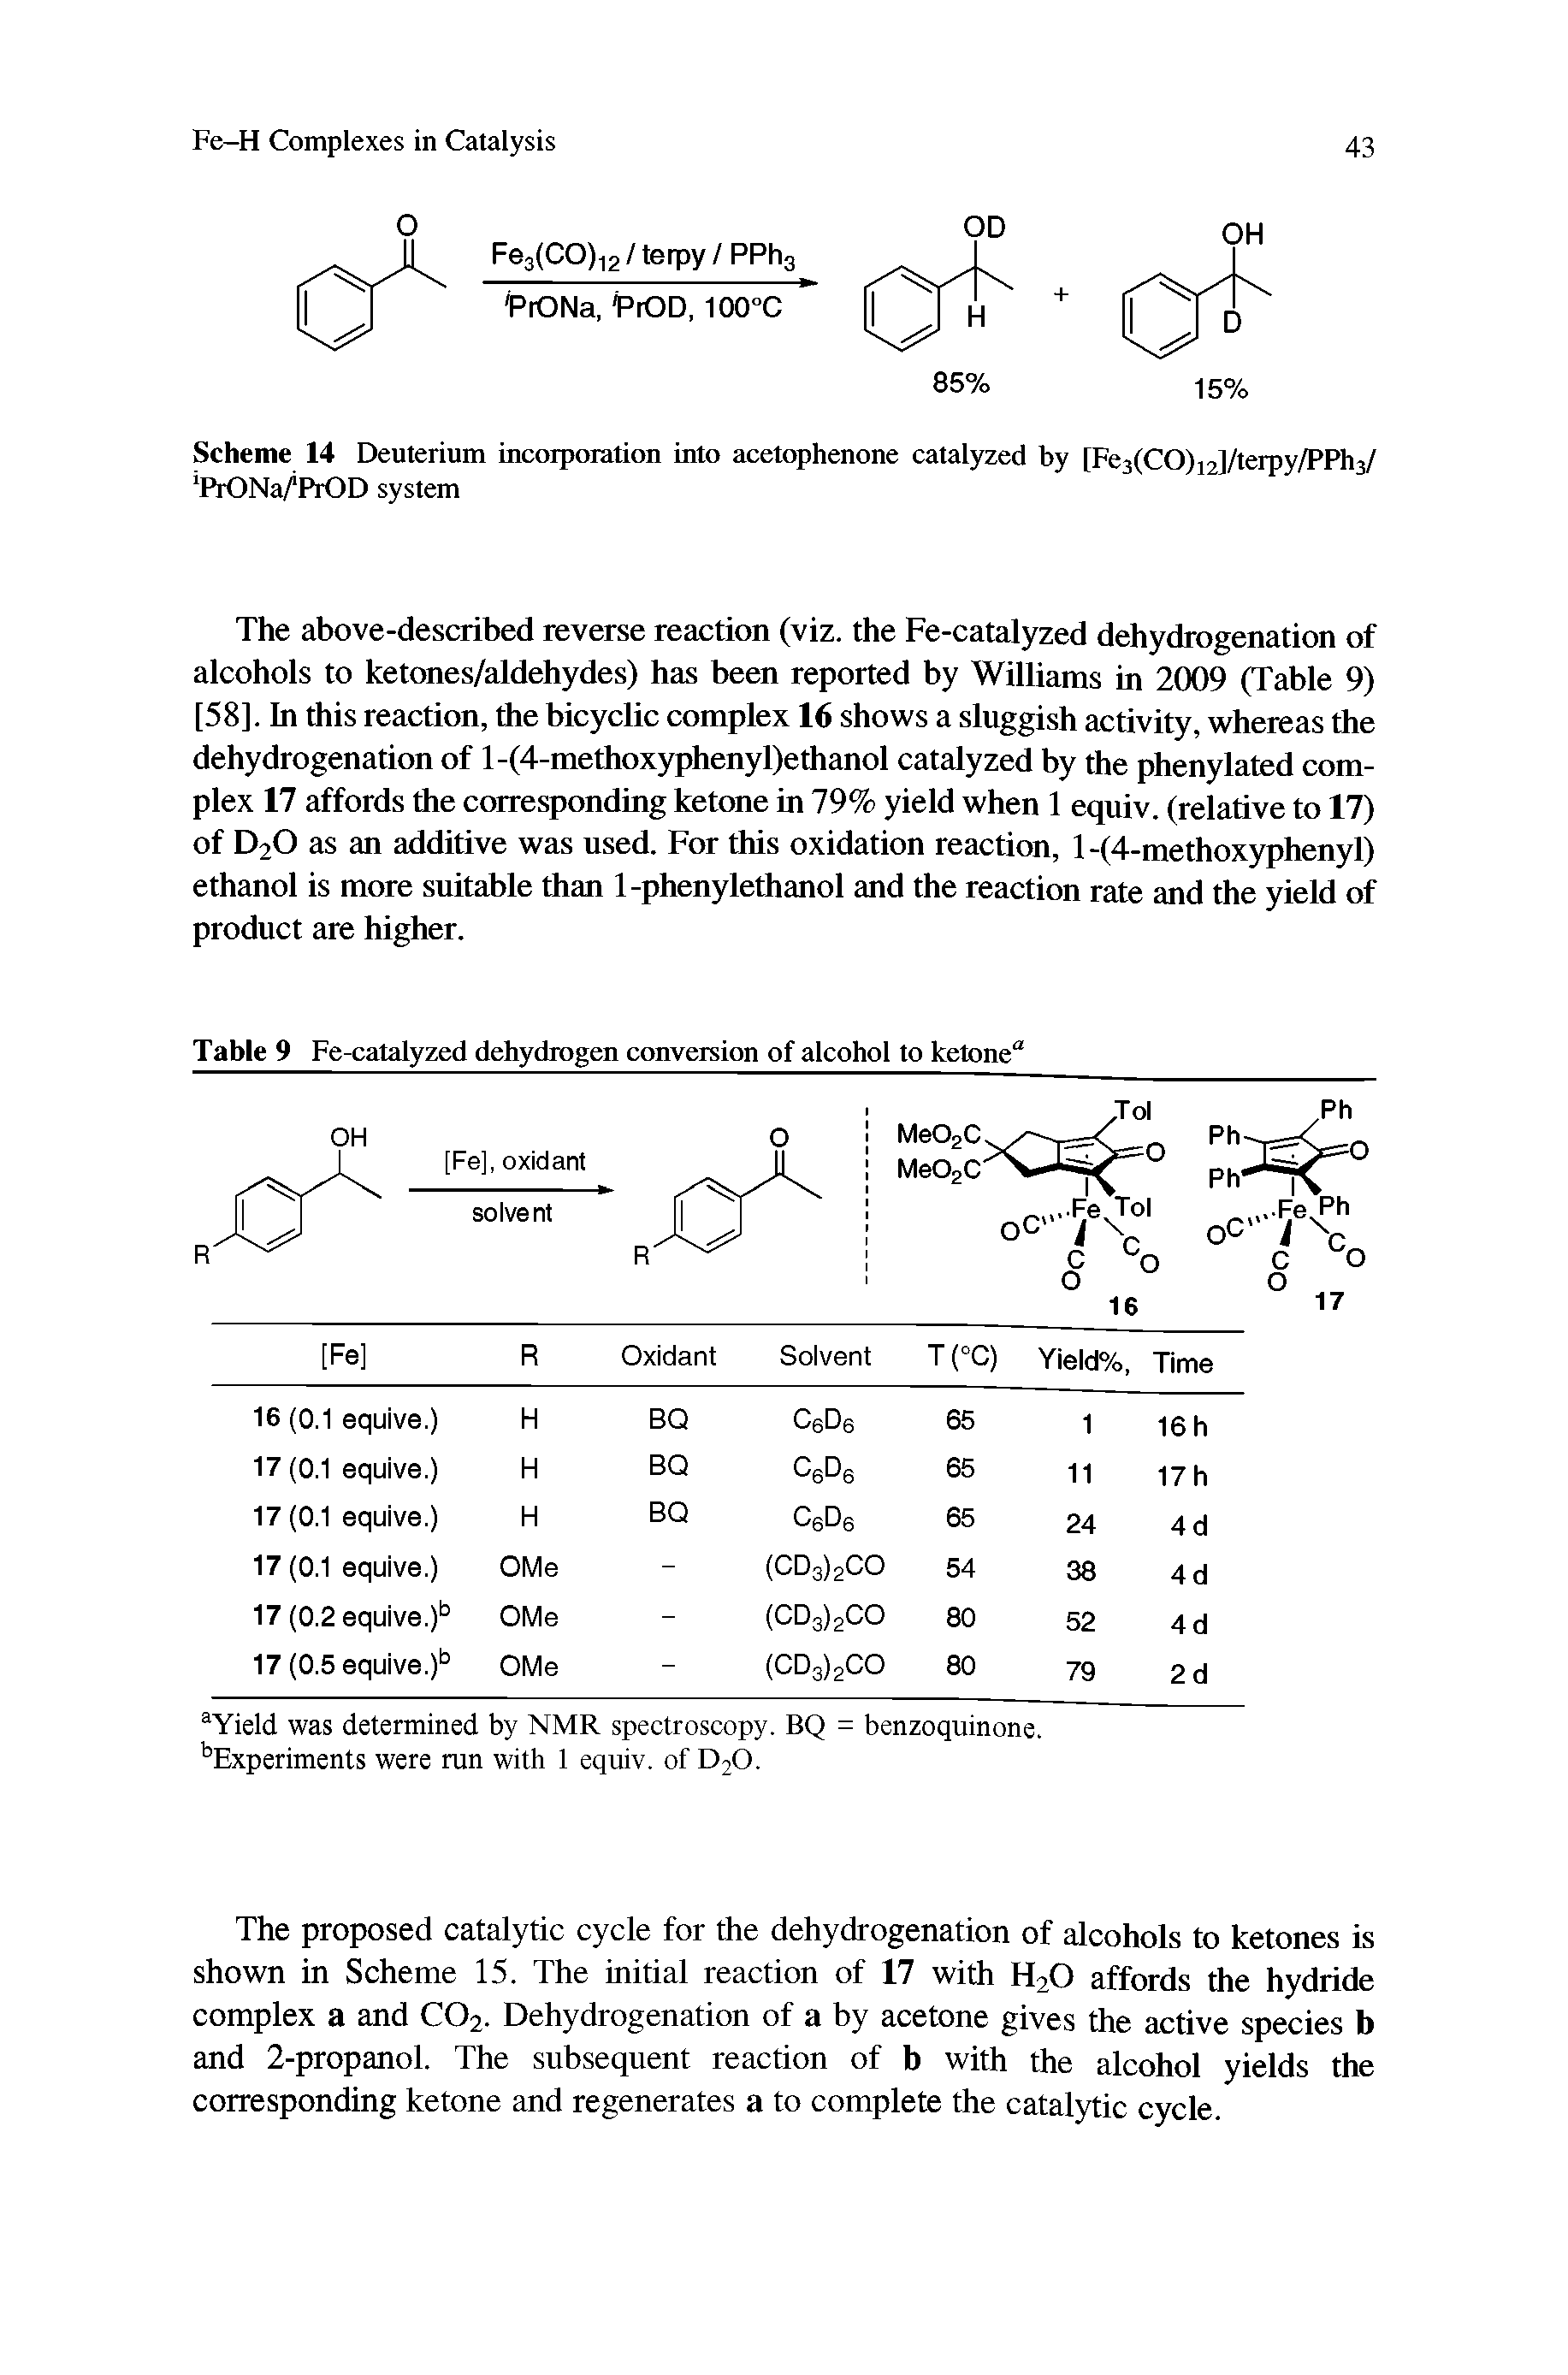 Table 9 Fe-catalyzed dehydrogen conversion of alcohol to ketone ...